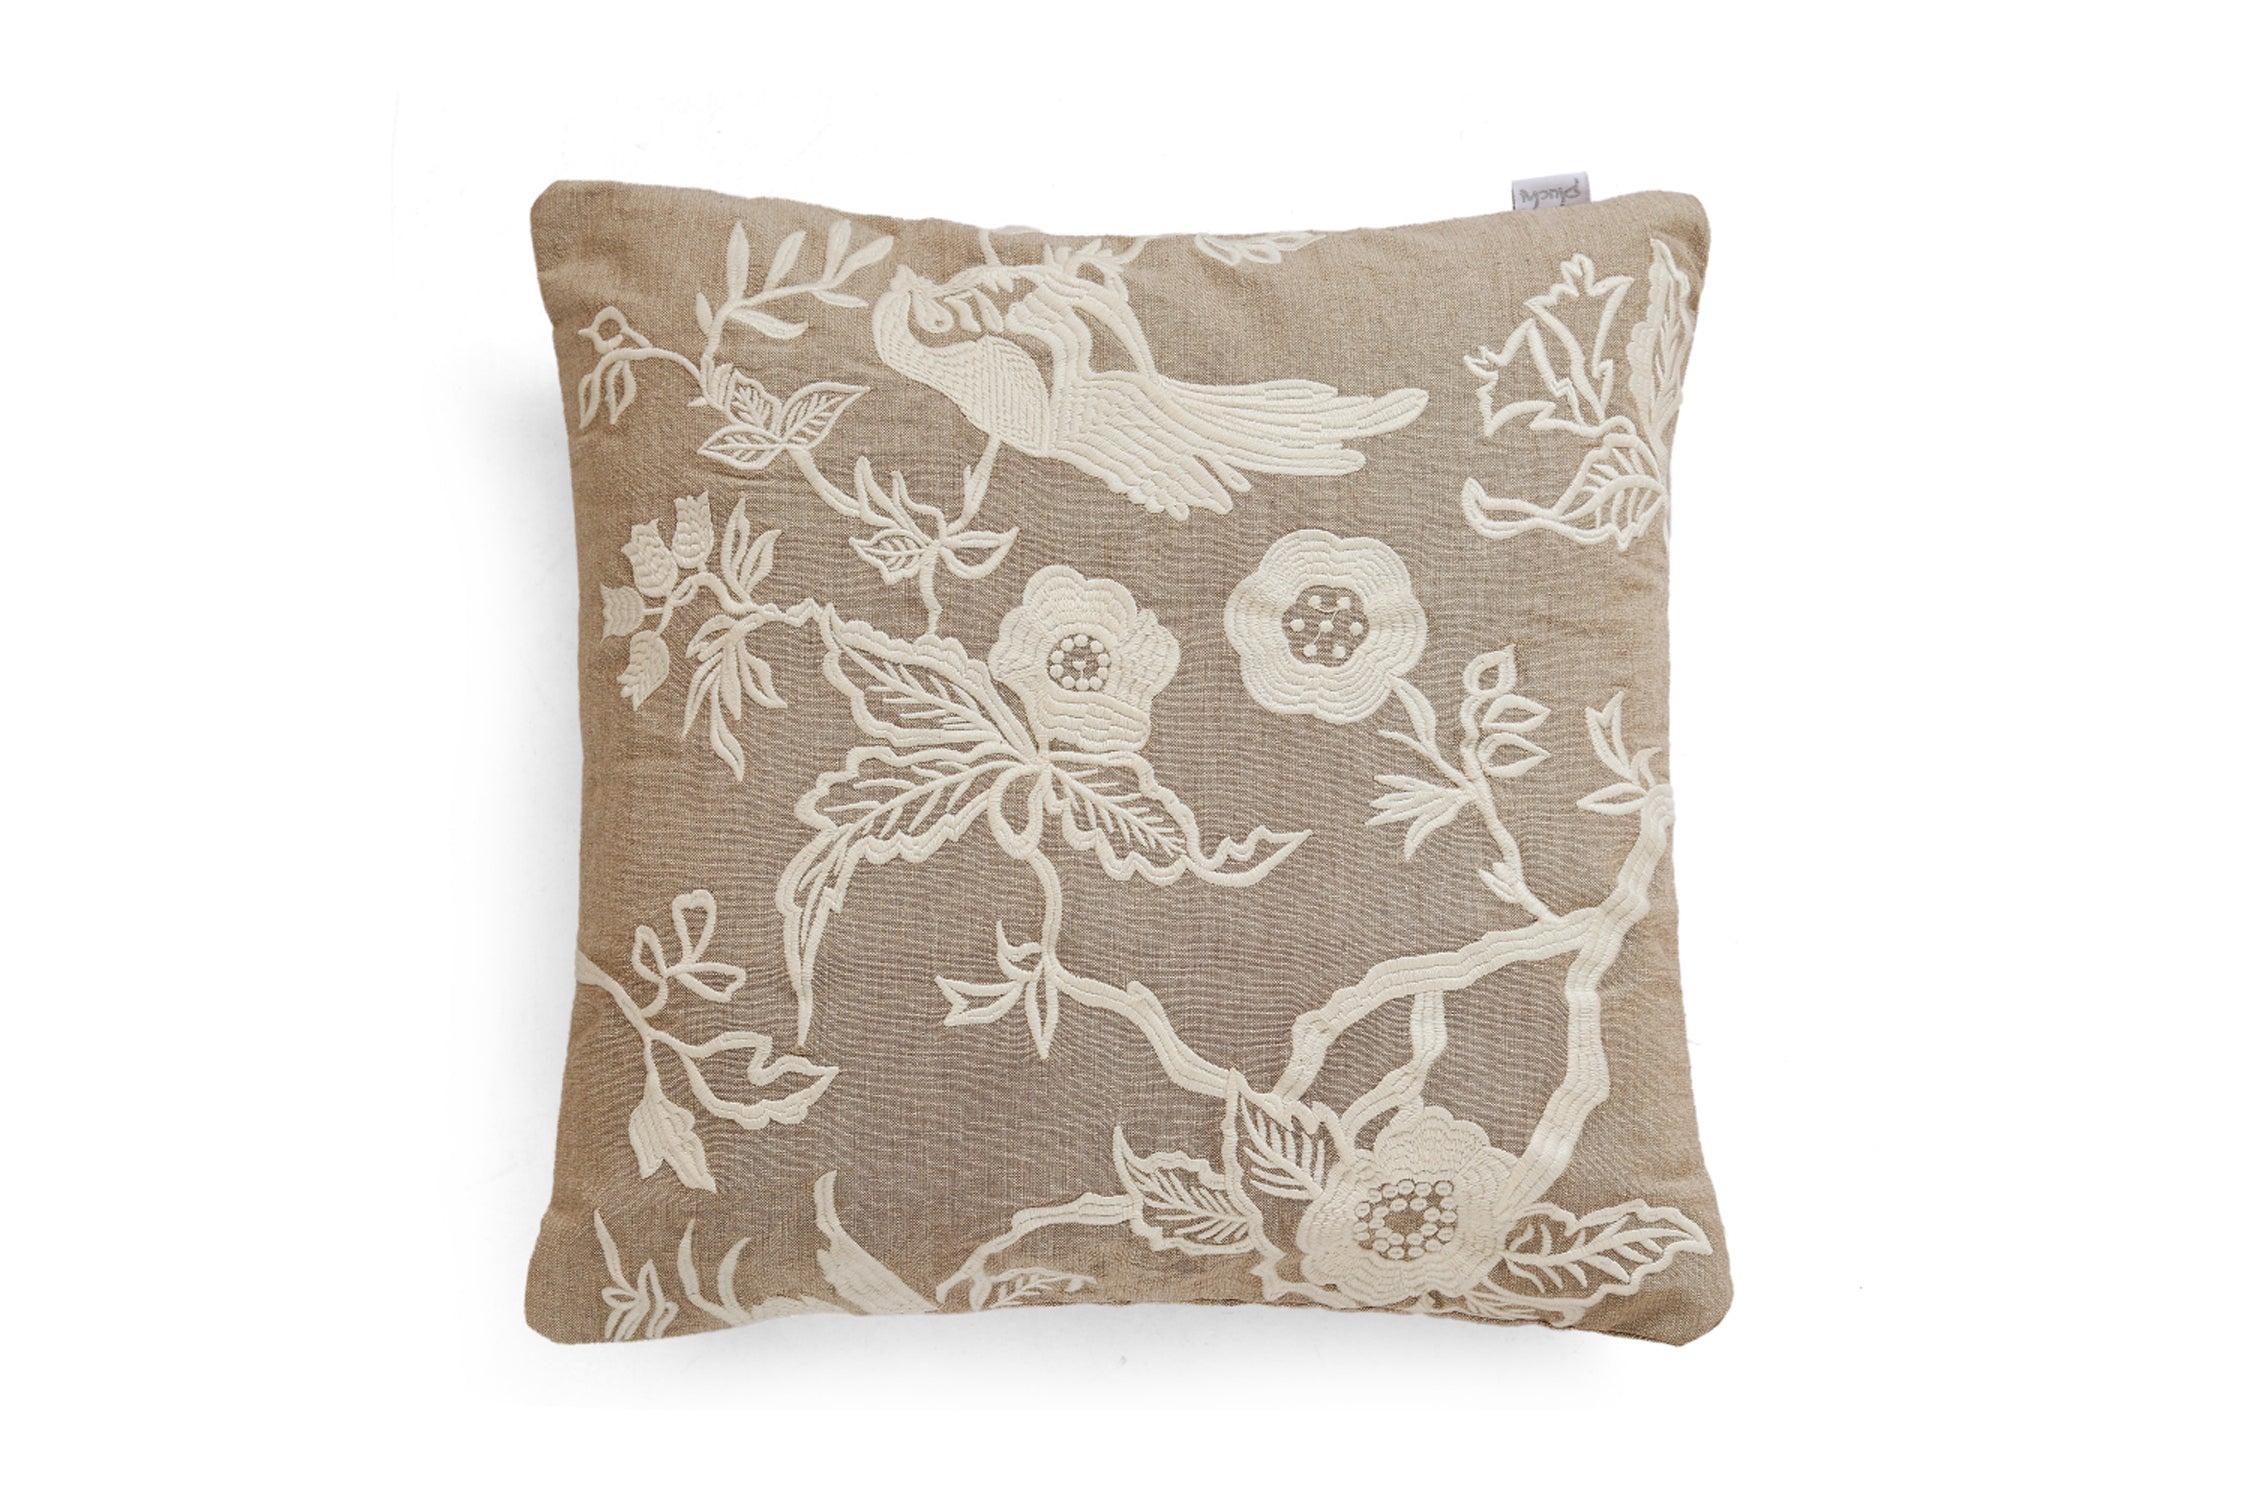 Florista- Embroidery Cushion cover